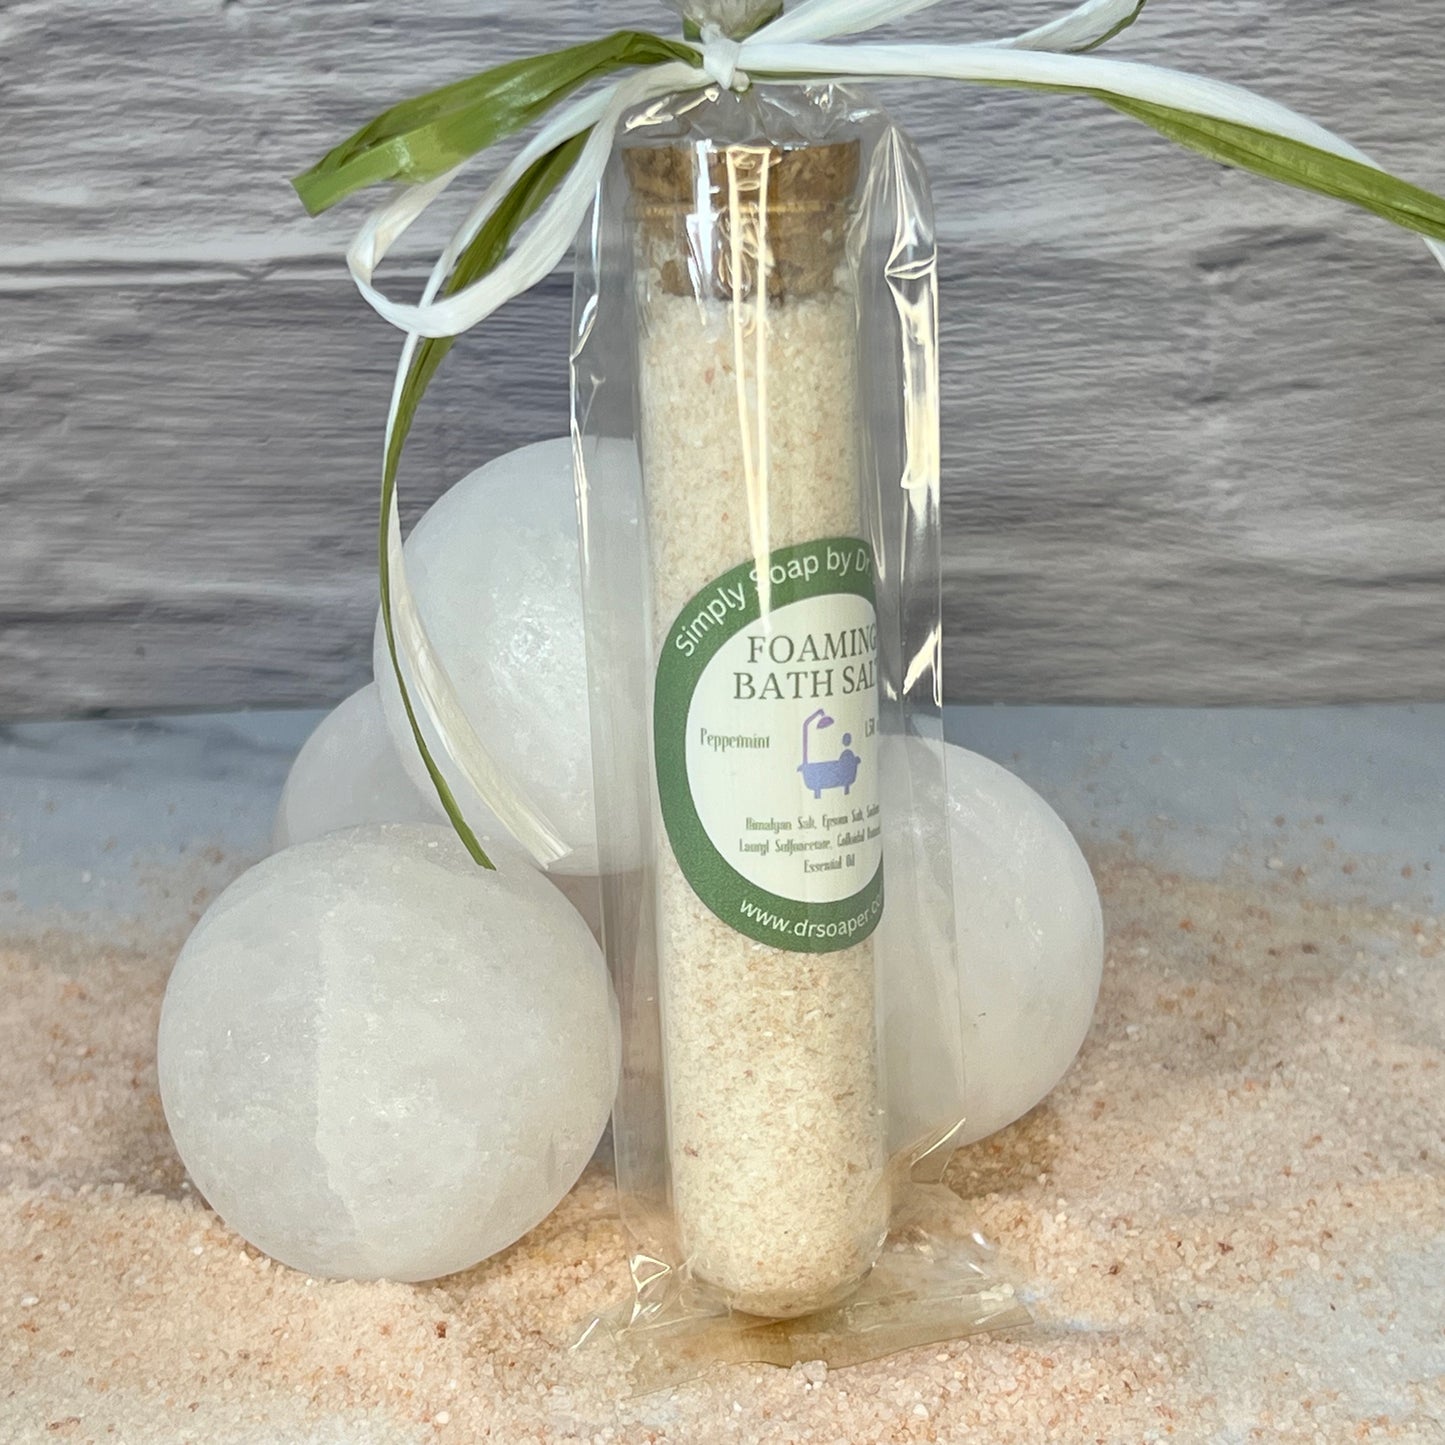 Bubbling Bath Salts. Single Use Size and ZERO waste. Makes a Great Gift for Mother's Day and Valentine's Day